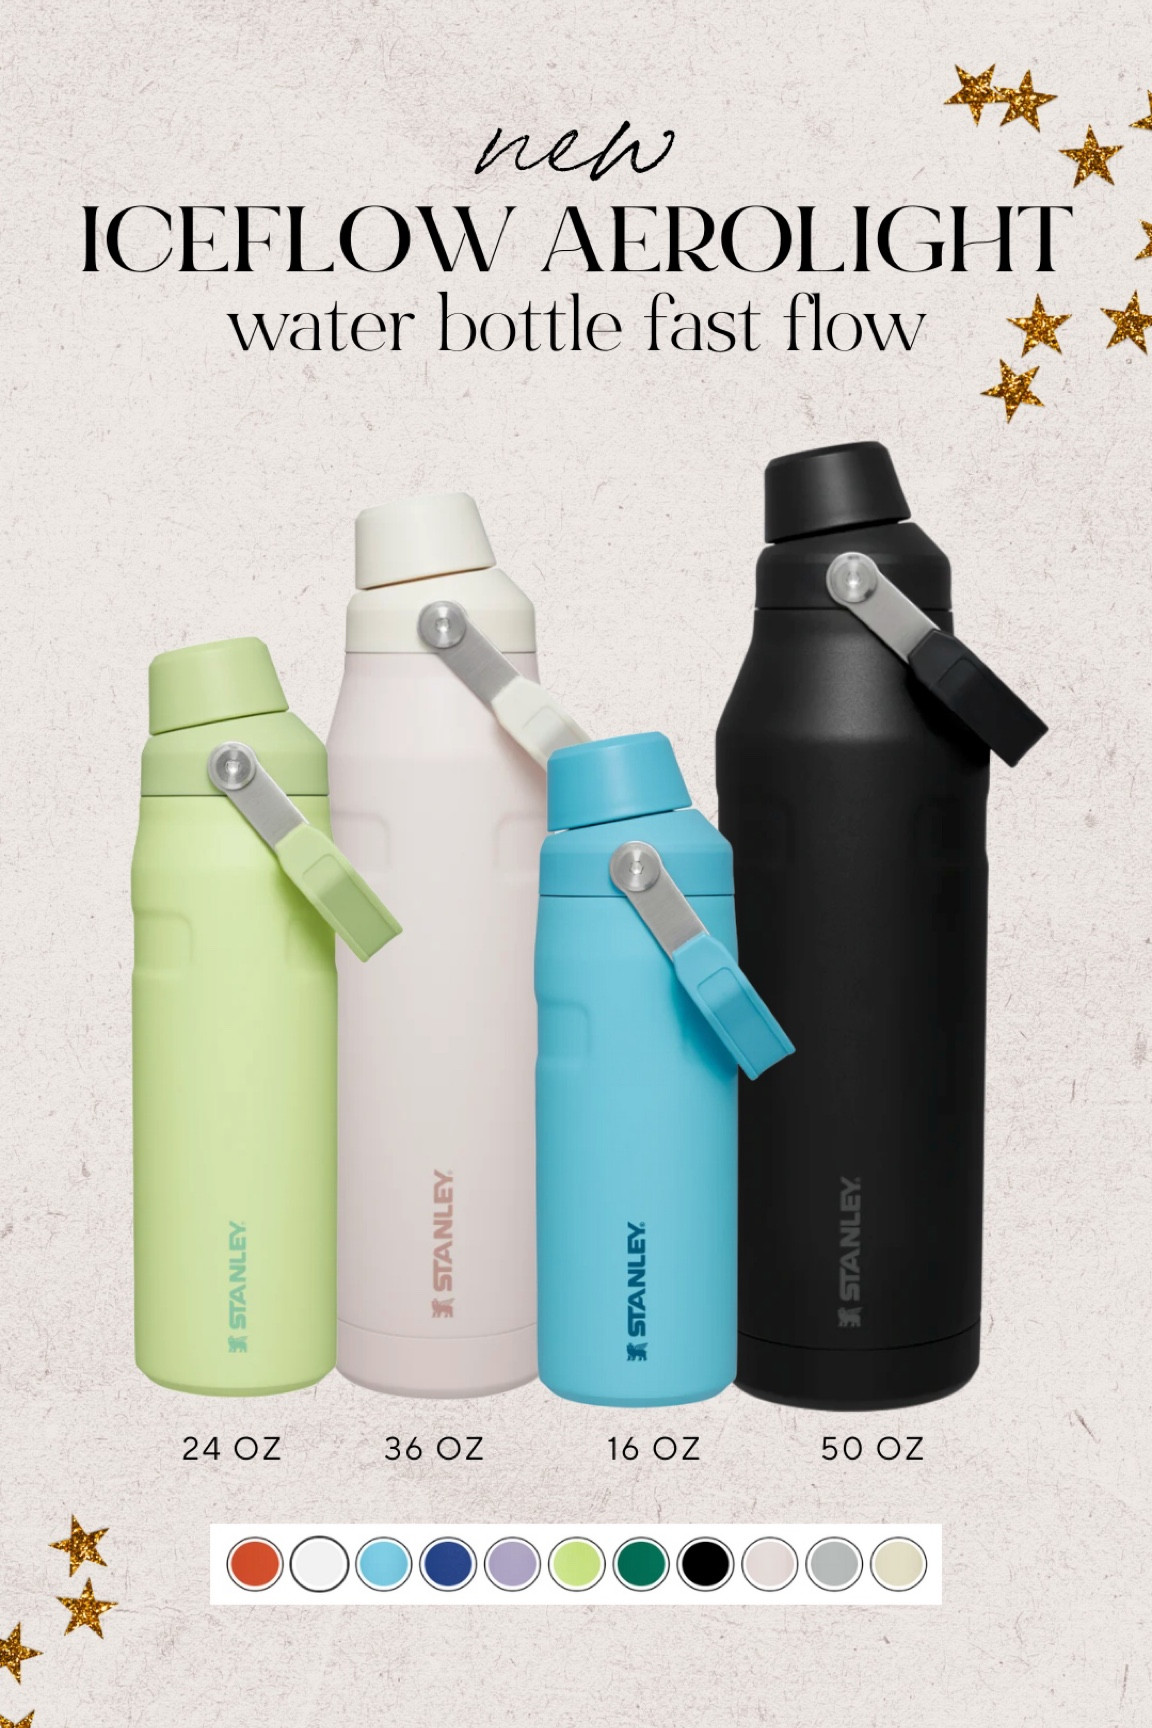 Here are our Stanleys! Featuring the new AeroLight IceFlow bottle